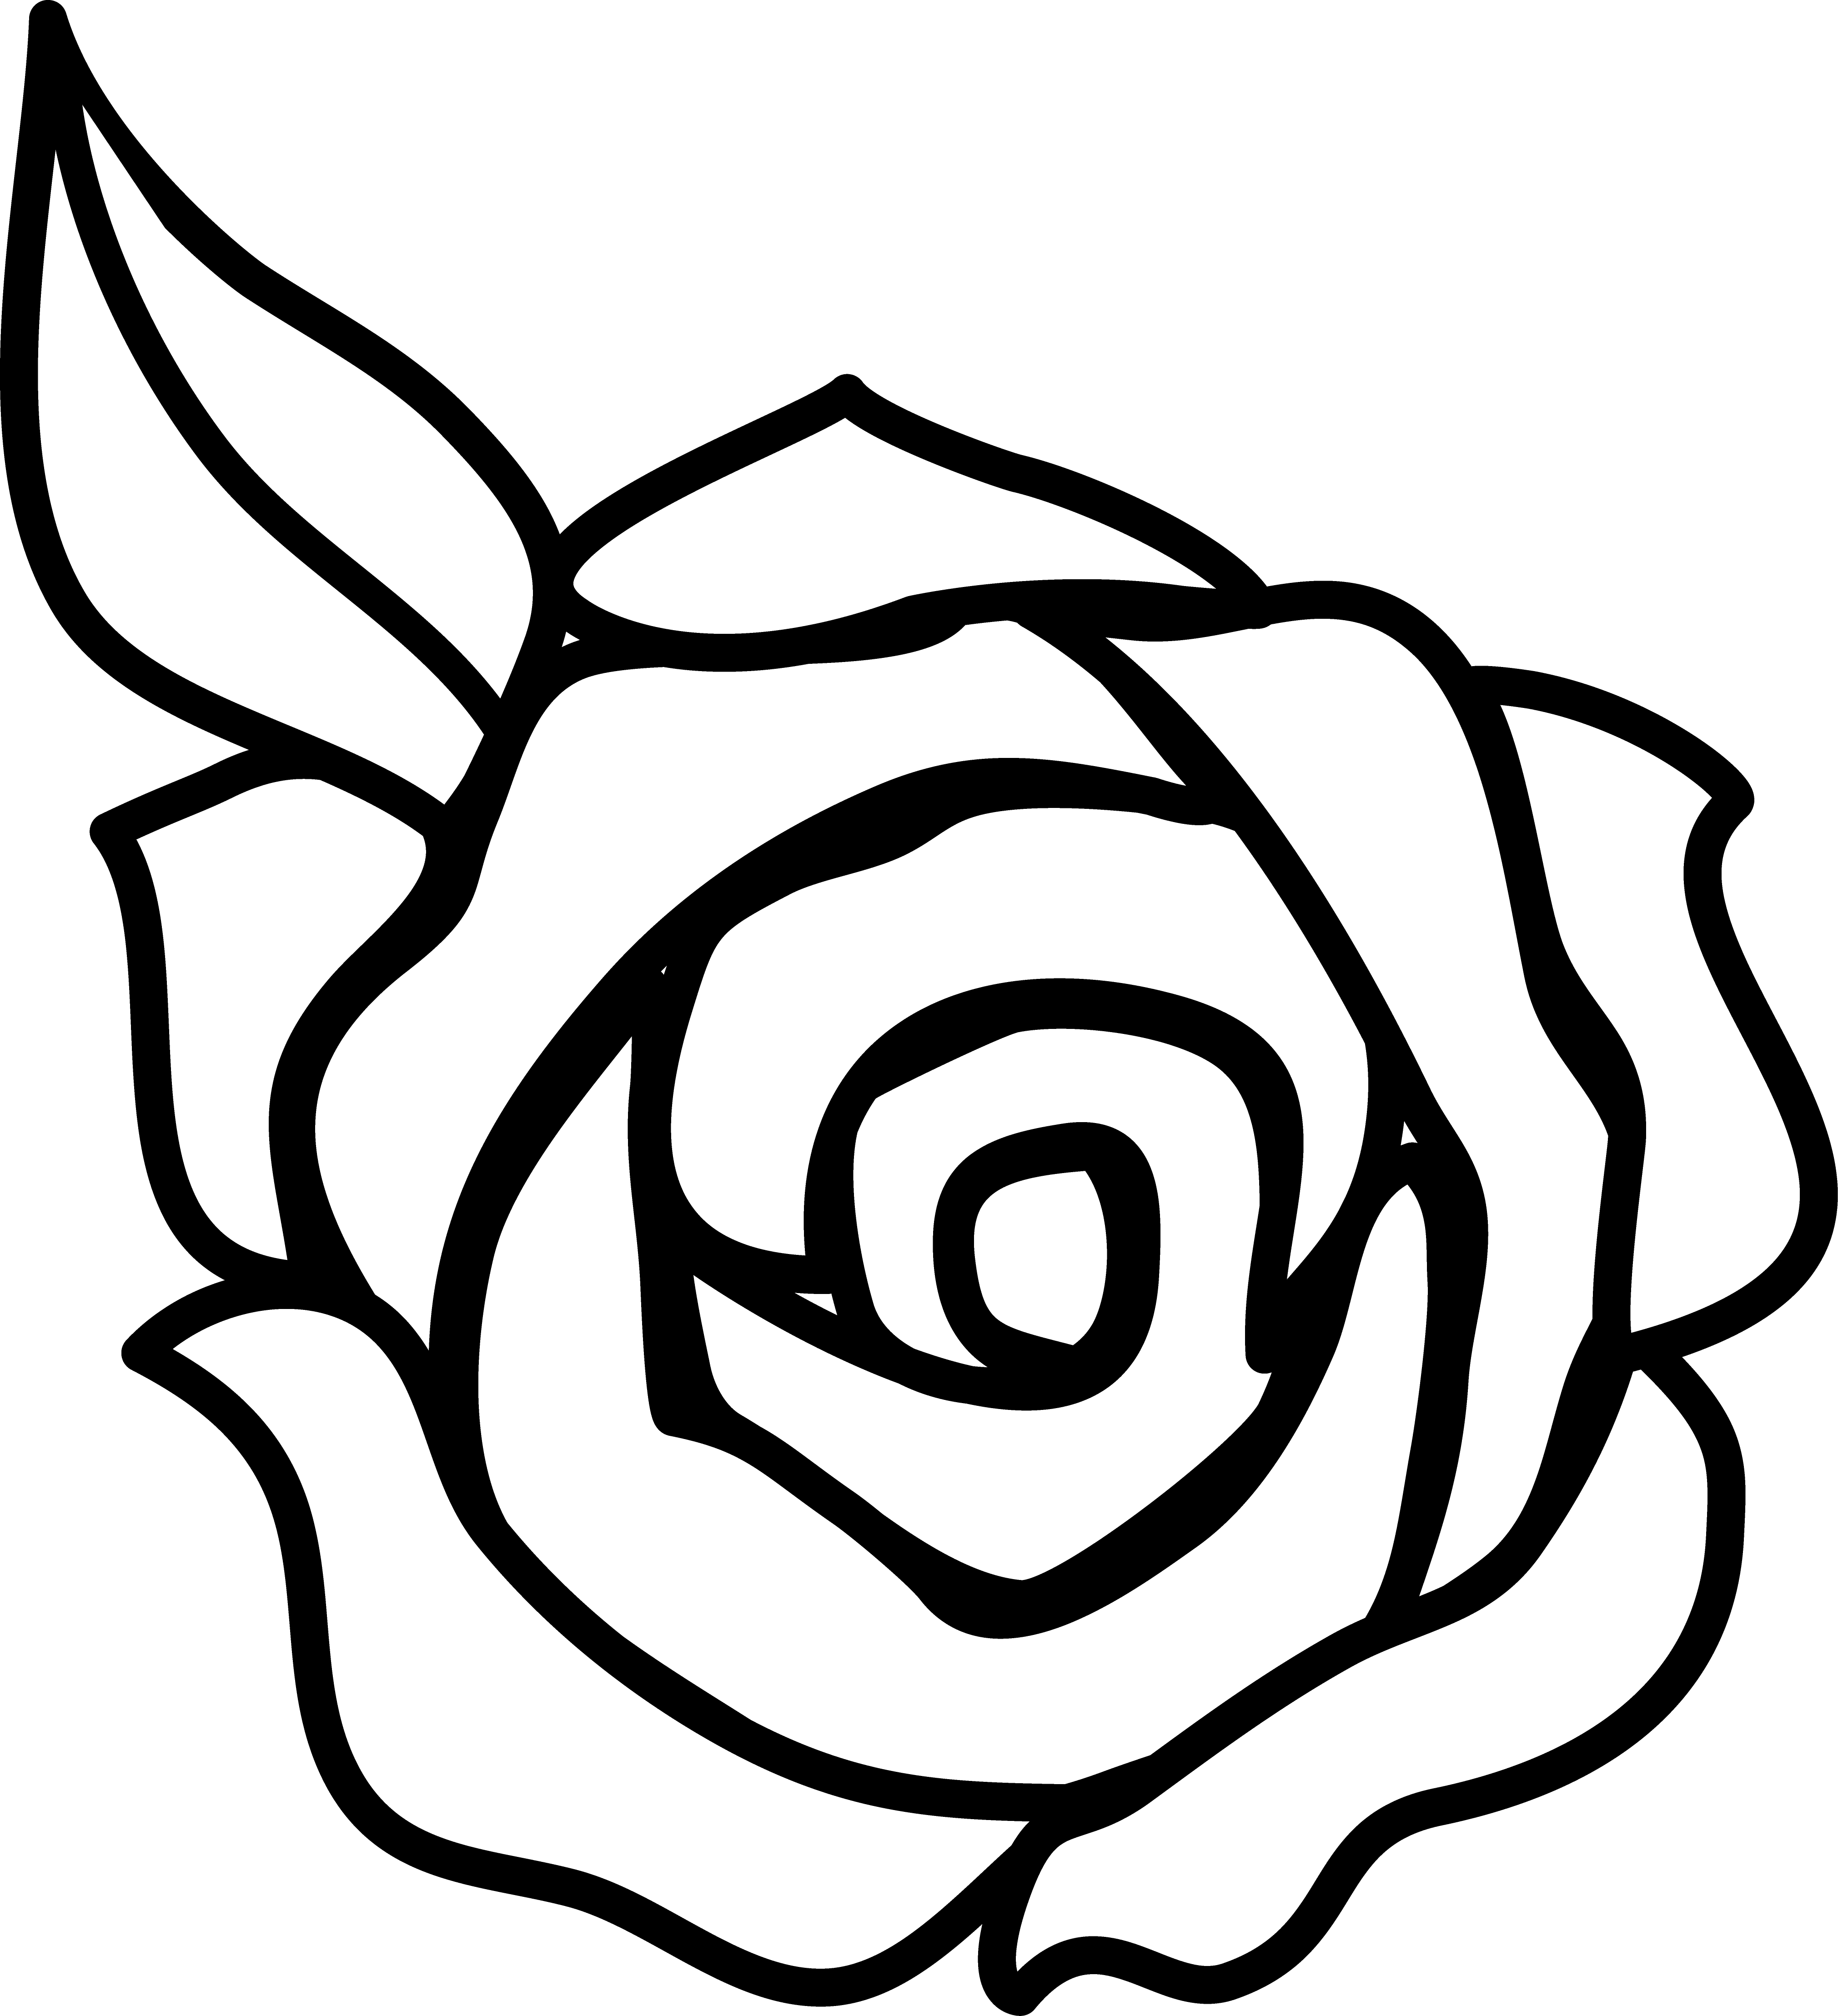 Resume clipart drawing. Black and white rose